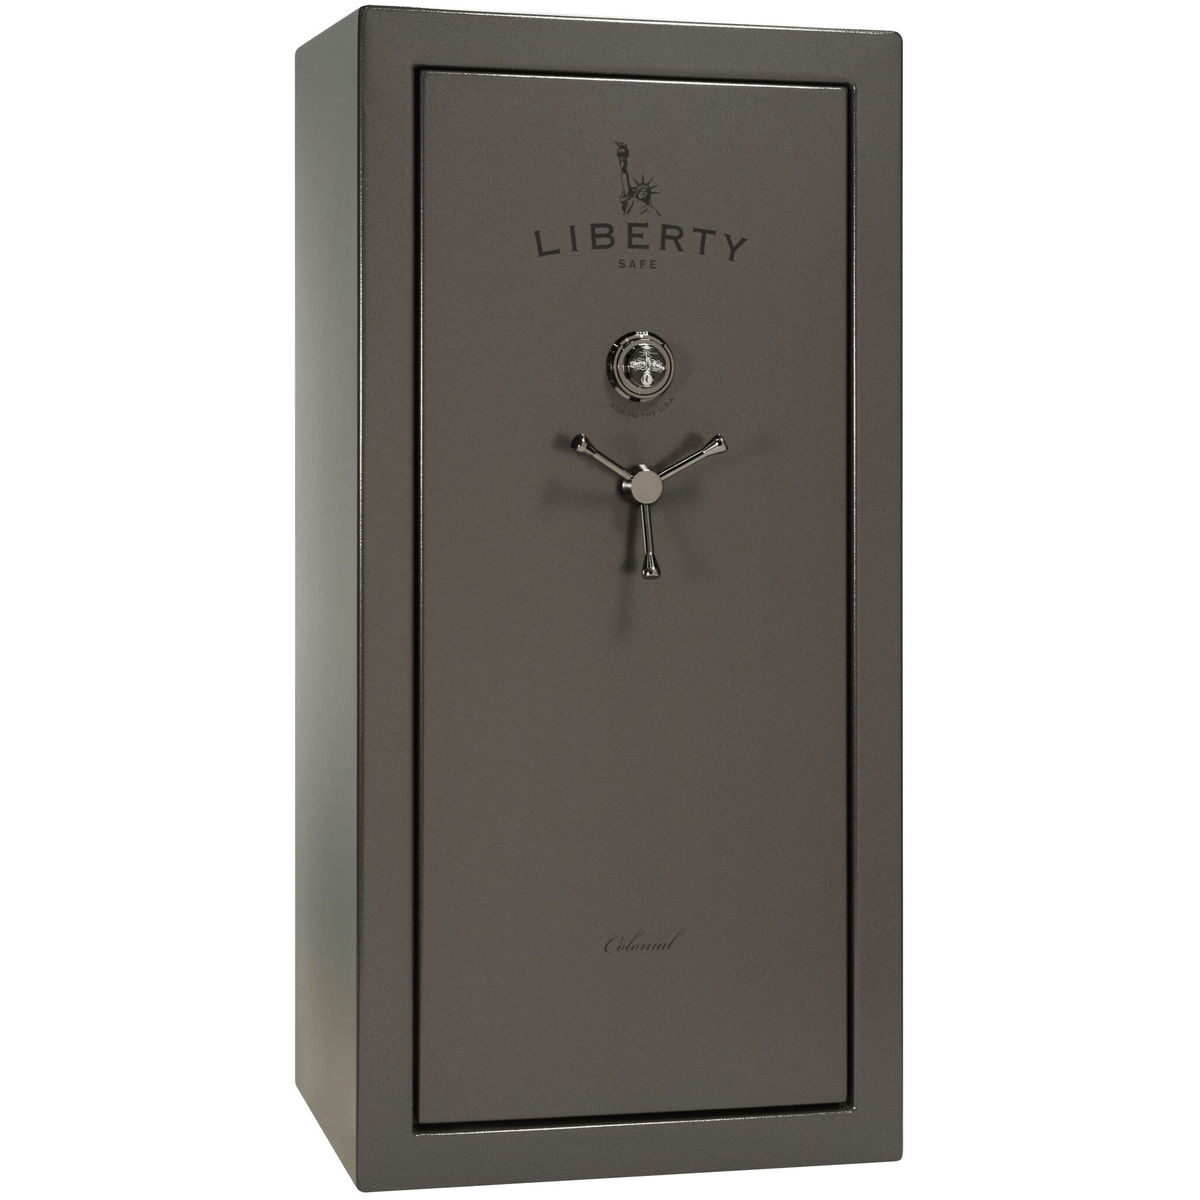 Liberty Colonial 23 Safe in Gray Marble with Black Chrome Mechanical Lock.